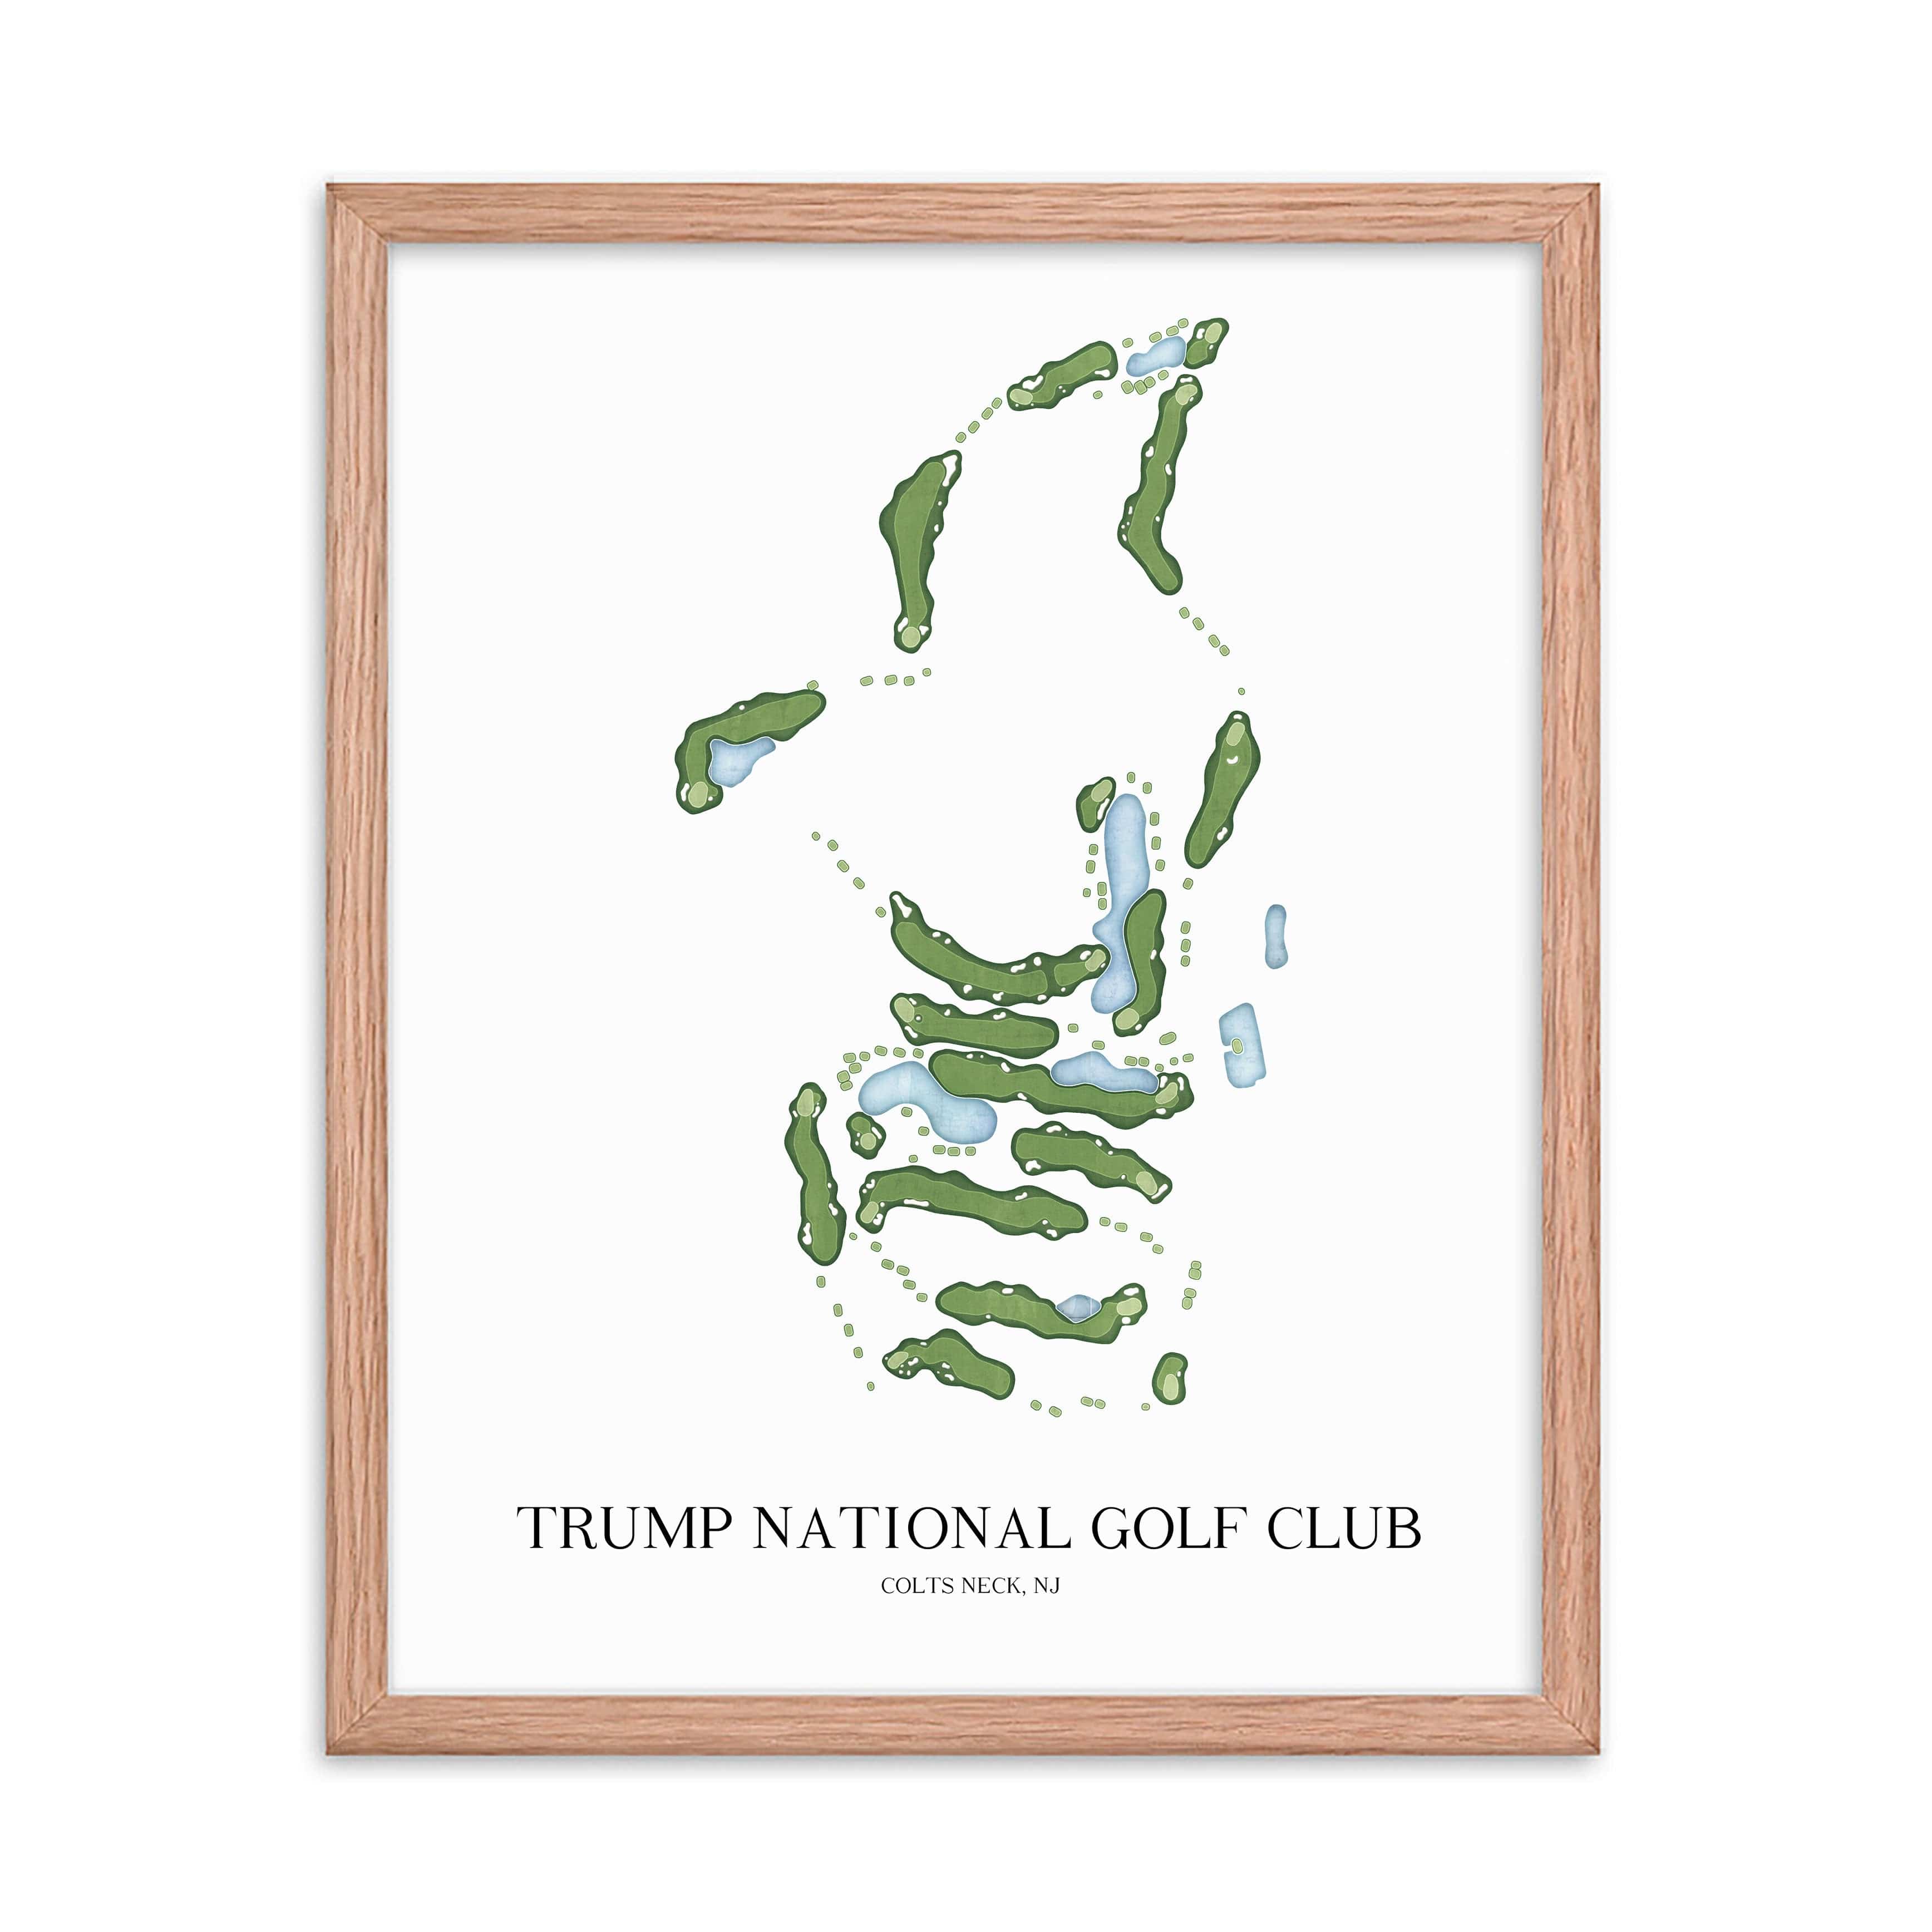 The 19th Hole Golf Shop - Golf Course Prints -  Trump National - Colts Neck Golf Course Map